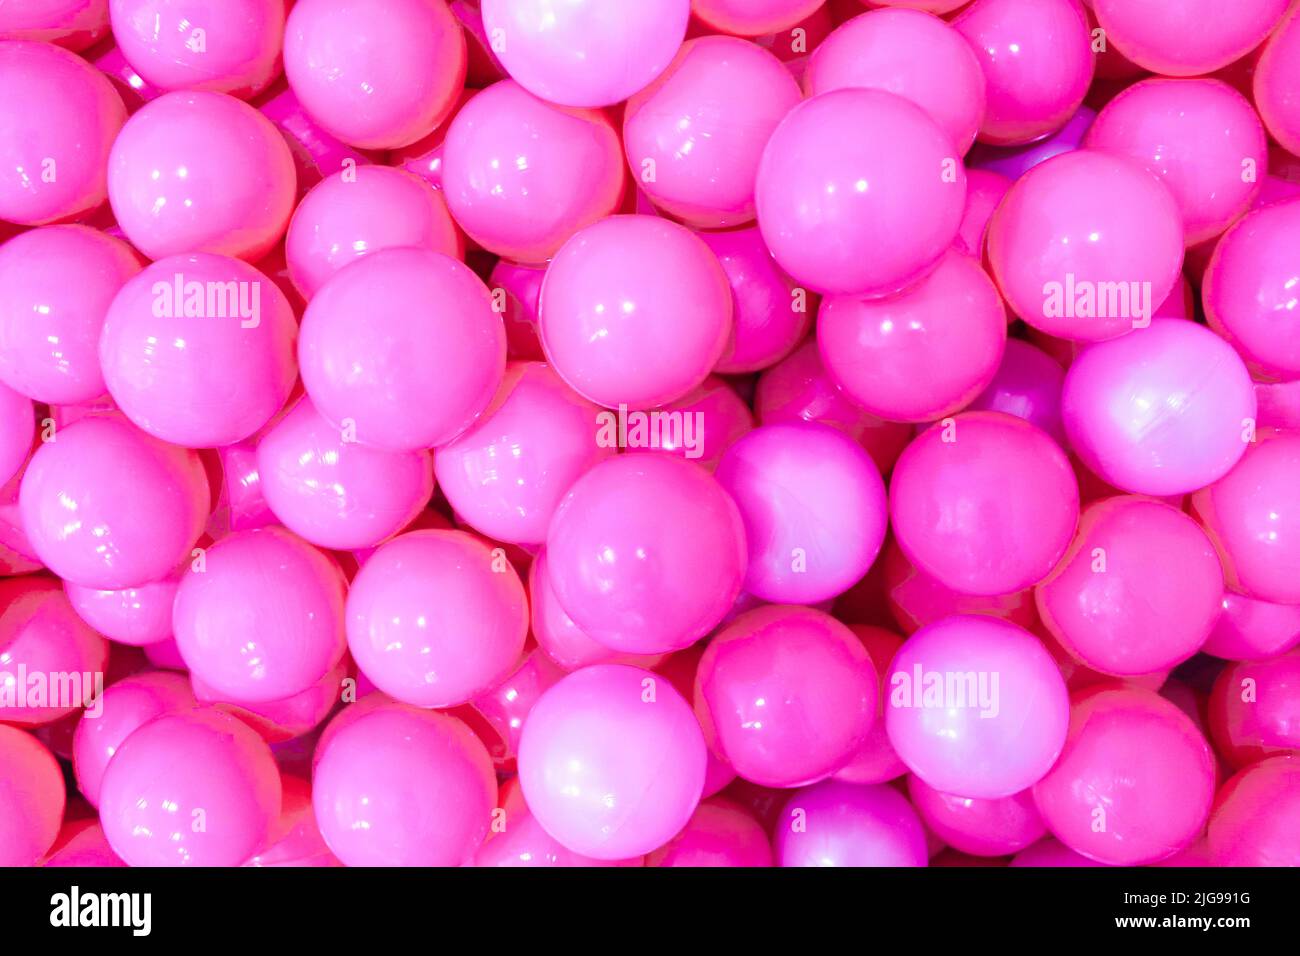 Pink plastic balloons. Isolated pink color background. Monochromatic concept. Stock Photo